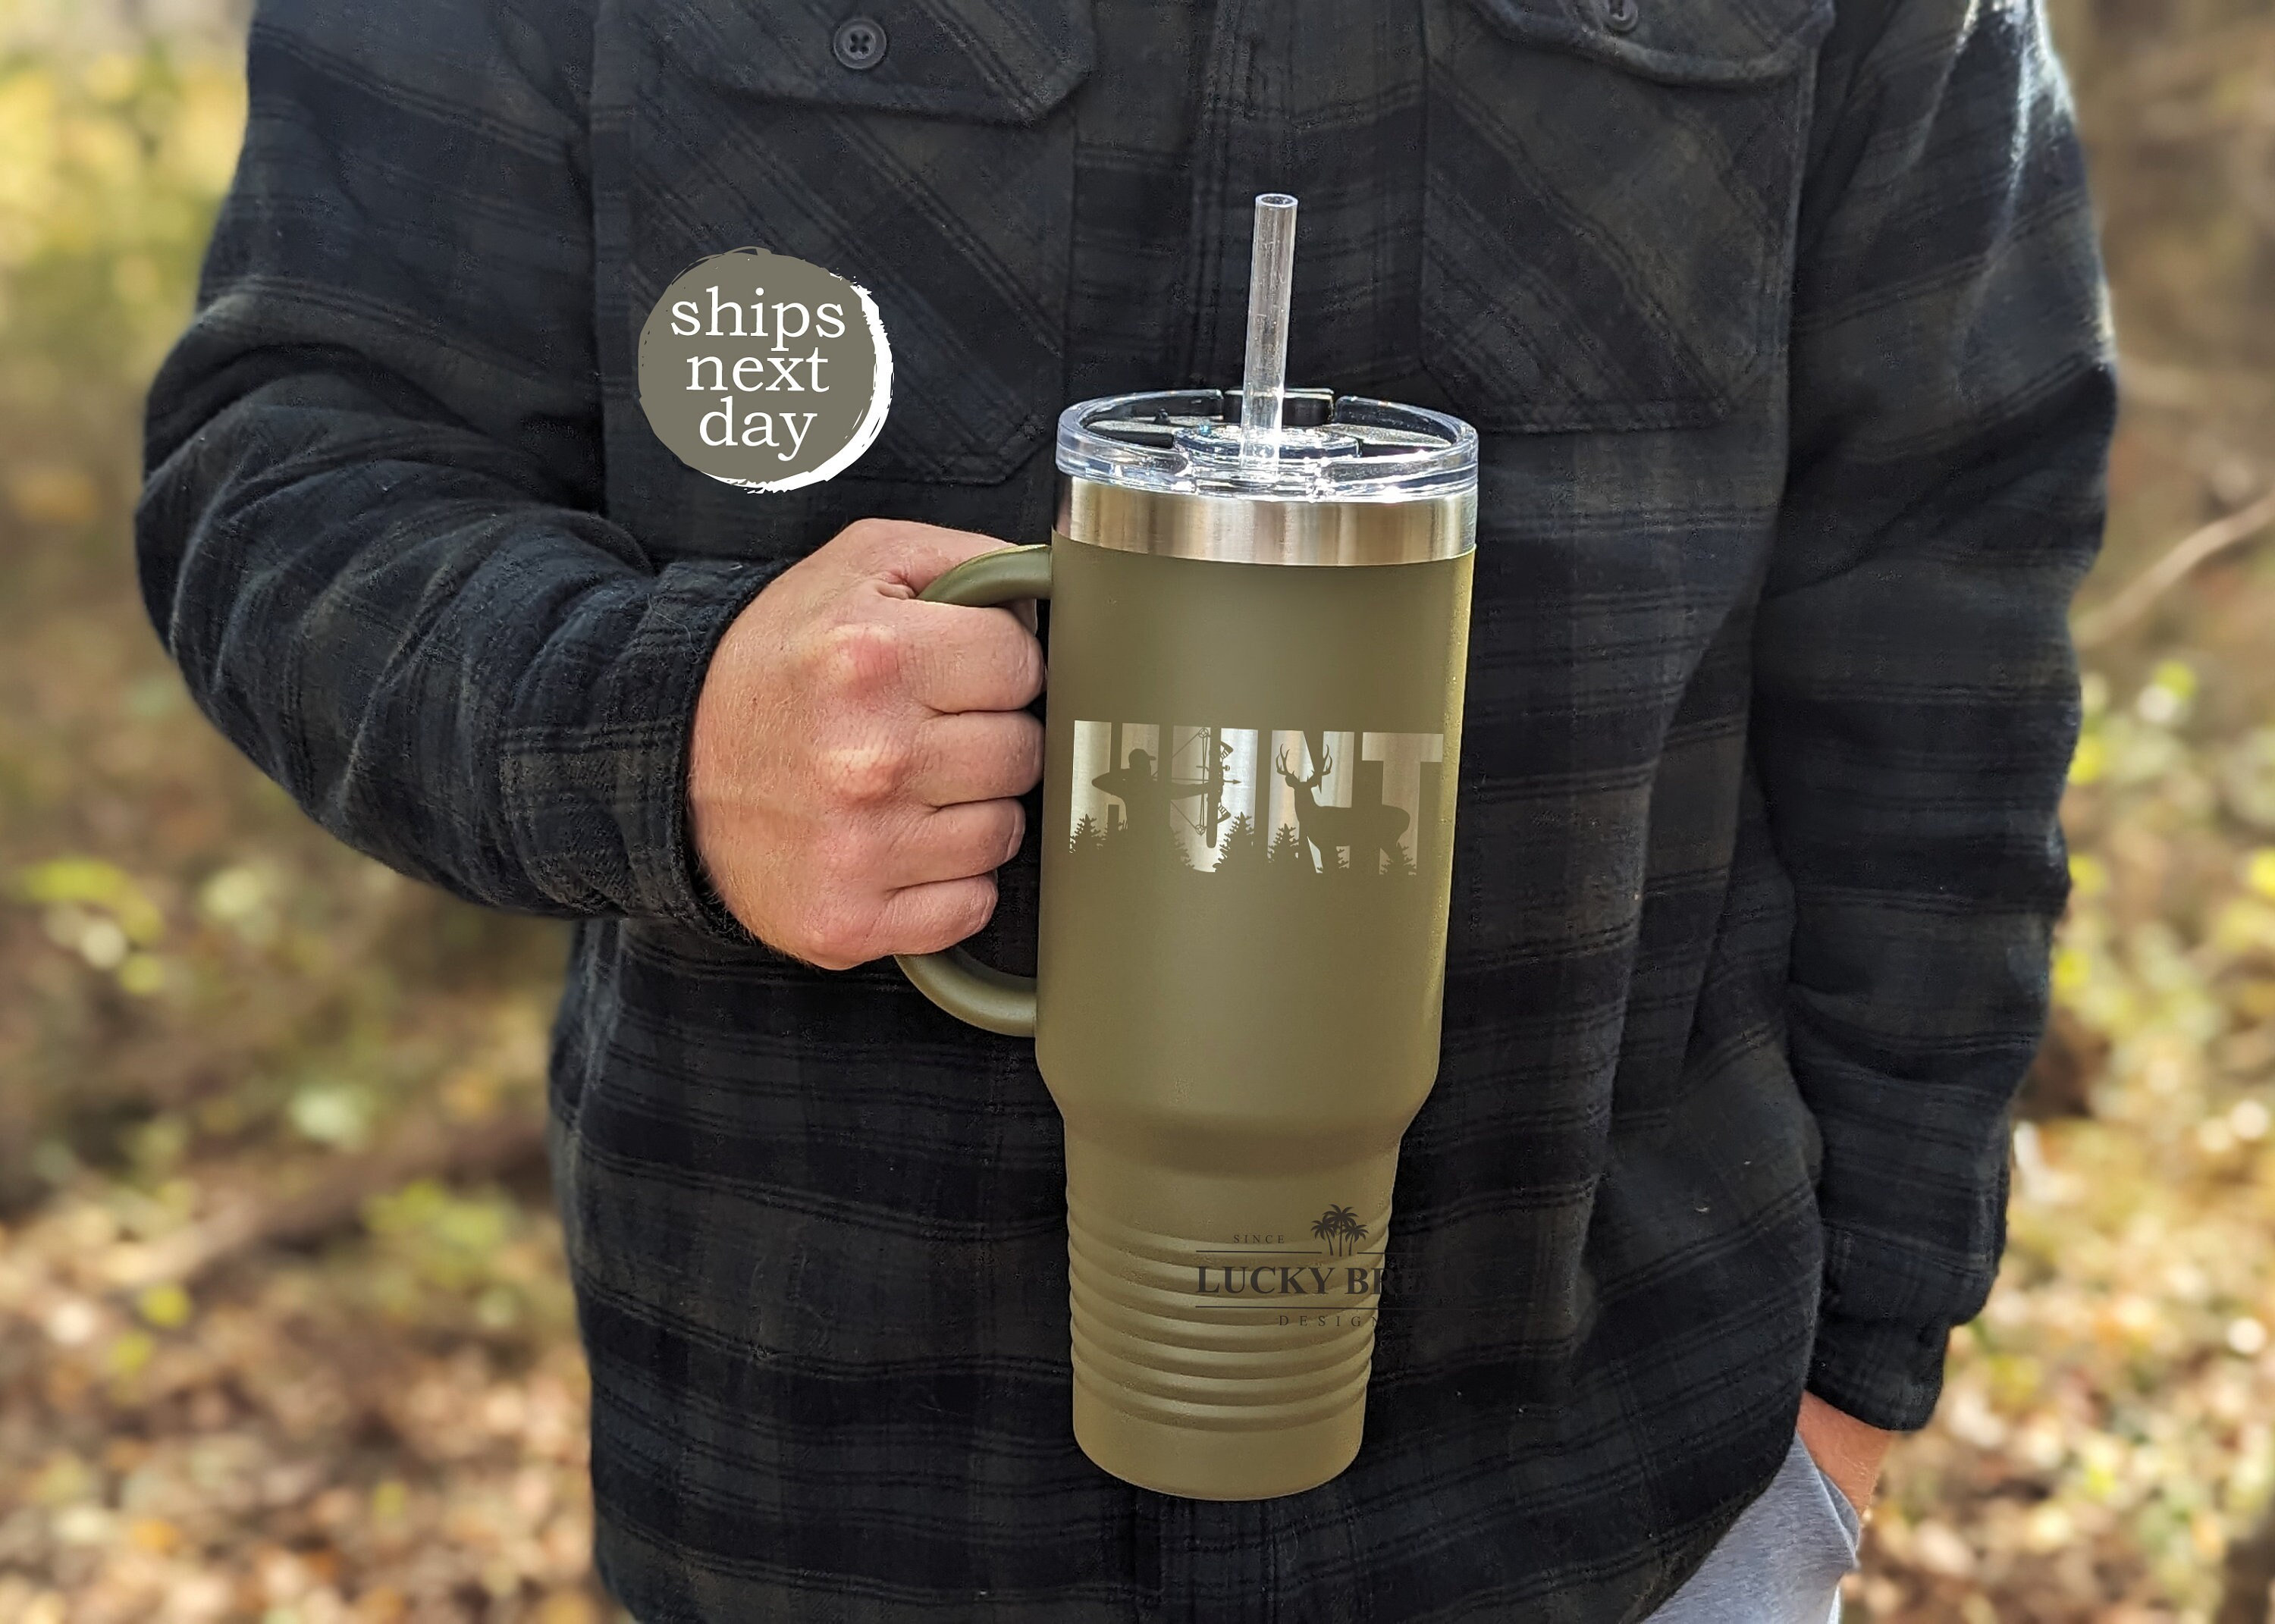 Ceovfoi Camo Tumbler with Handle Lid and Straw, Hunting Gifts for Men  Women,40 oz Camo Tumbler Travel Coffee Cup Mug Water Botter